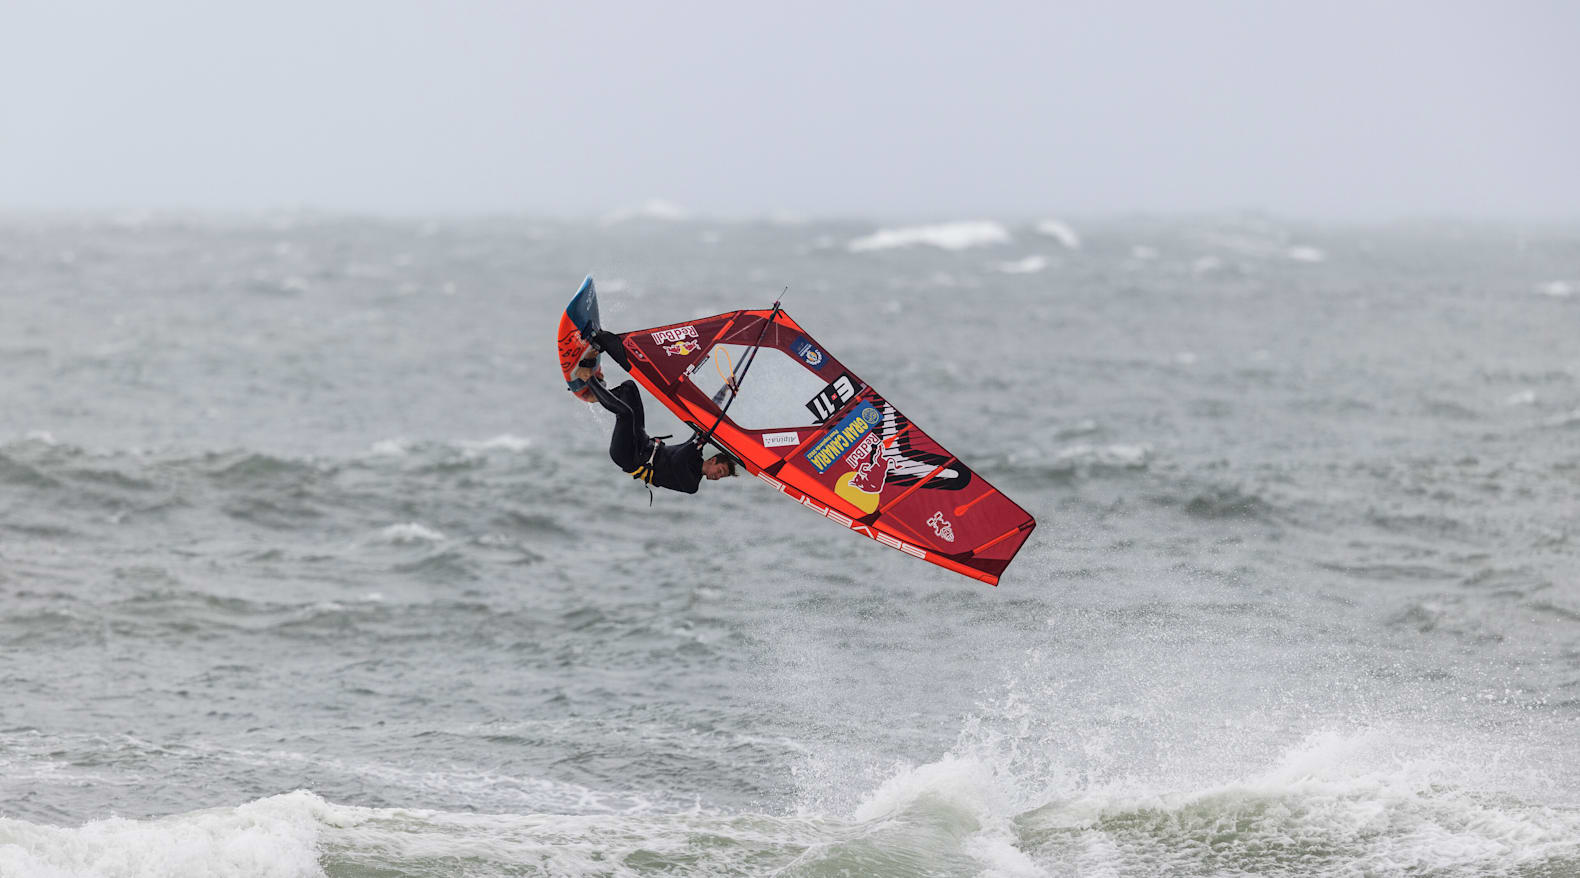 Liam Dunkerbeck competing at the Cold Hawaii PWA Youth Windsurf Wave World Cup 2022 in Denmark on September 14, 2022